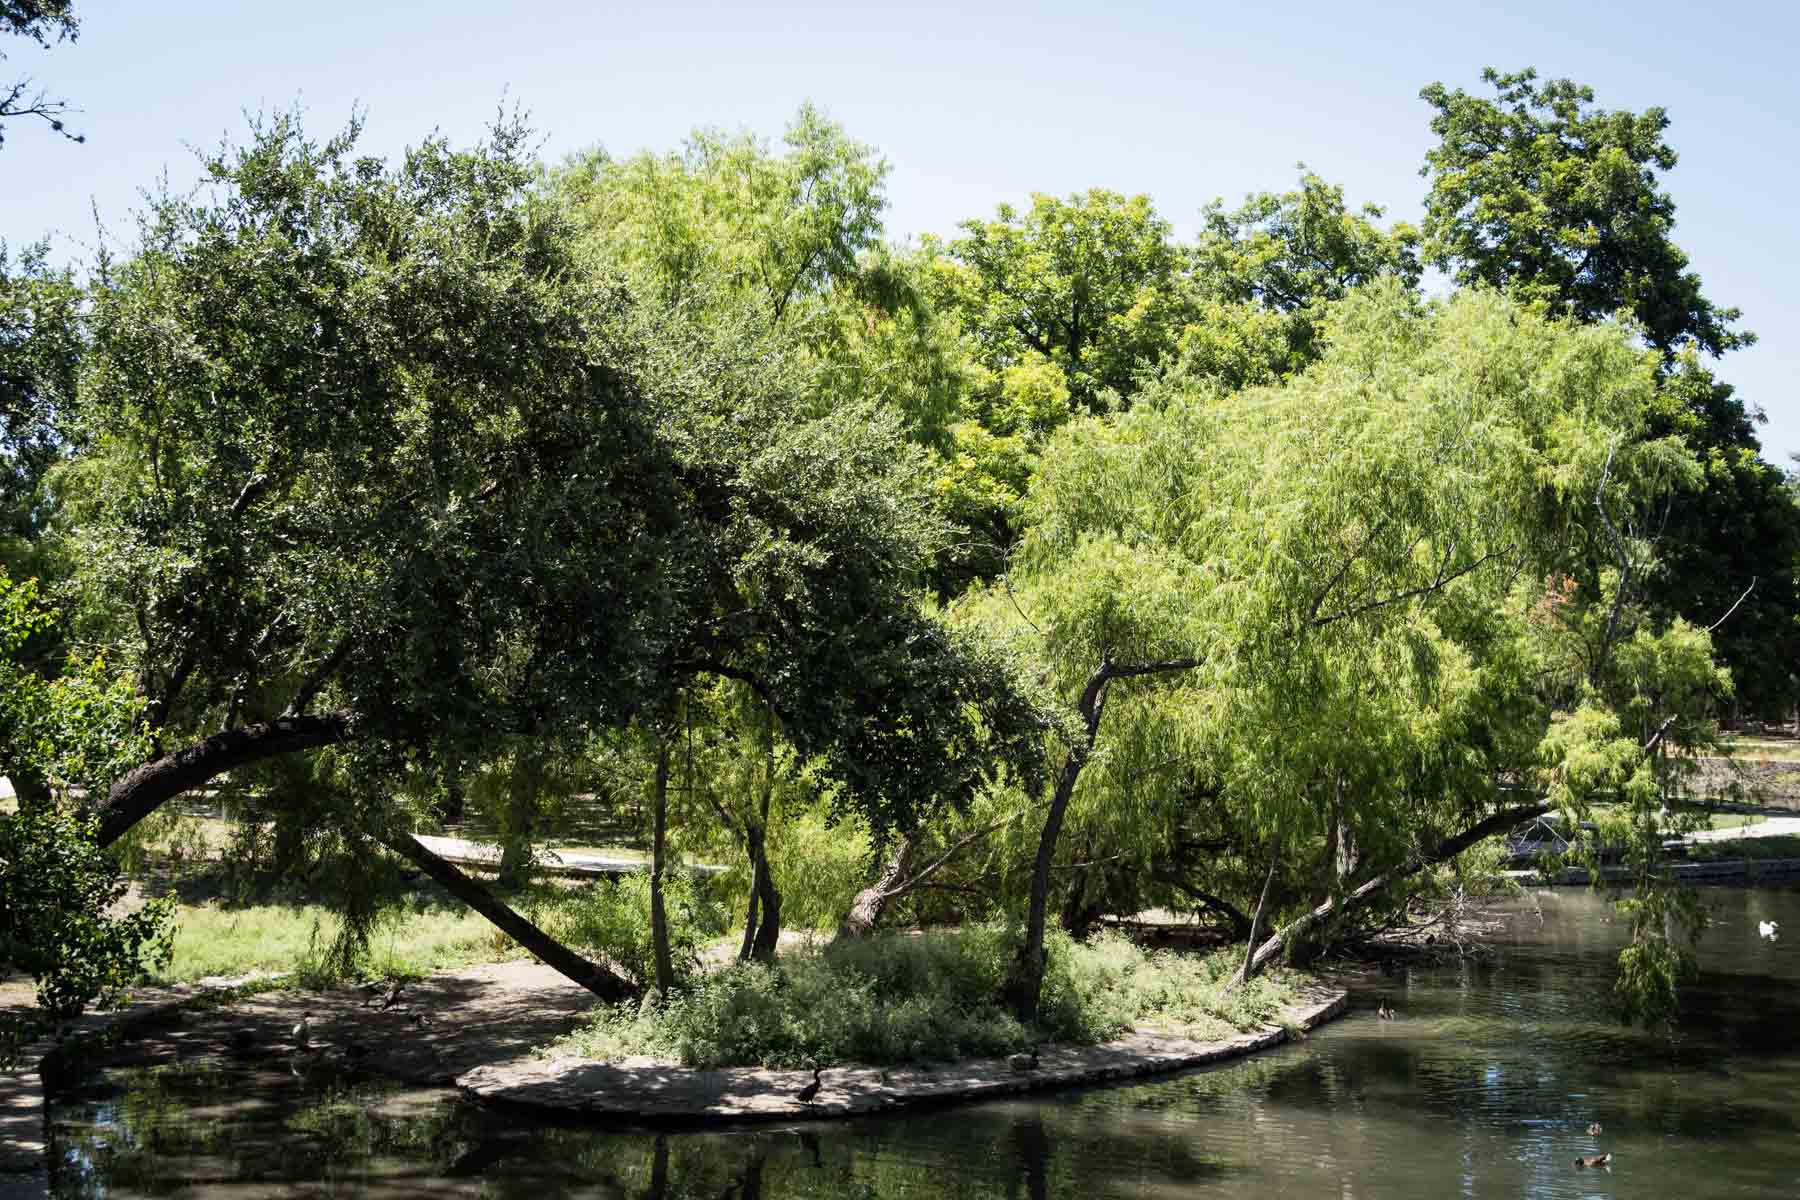 Island of trees in river in Brackenridge Park for an article on the best San Antonio parks for family portraits